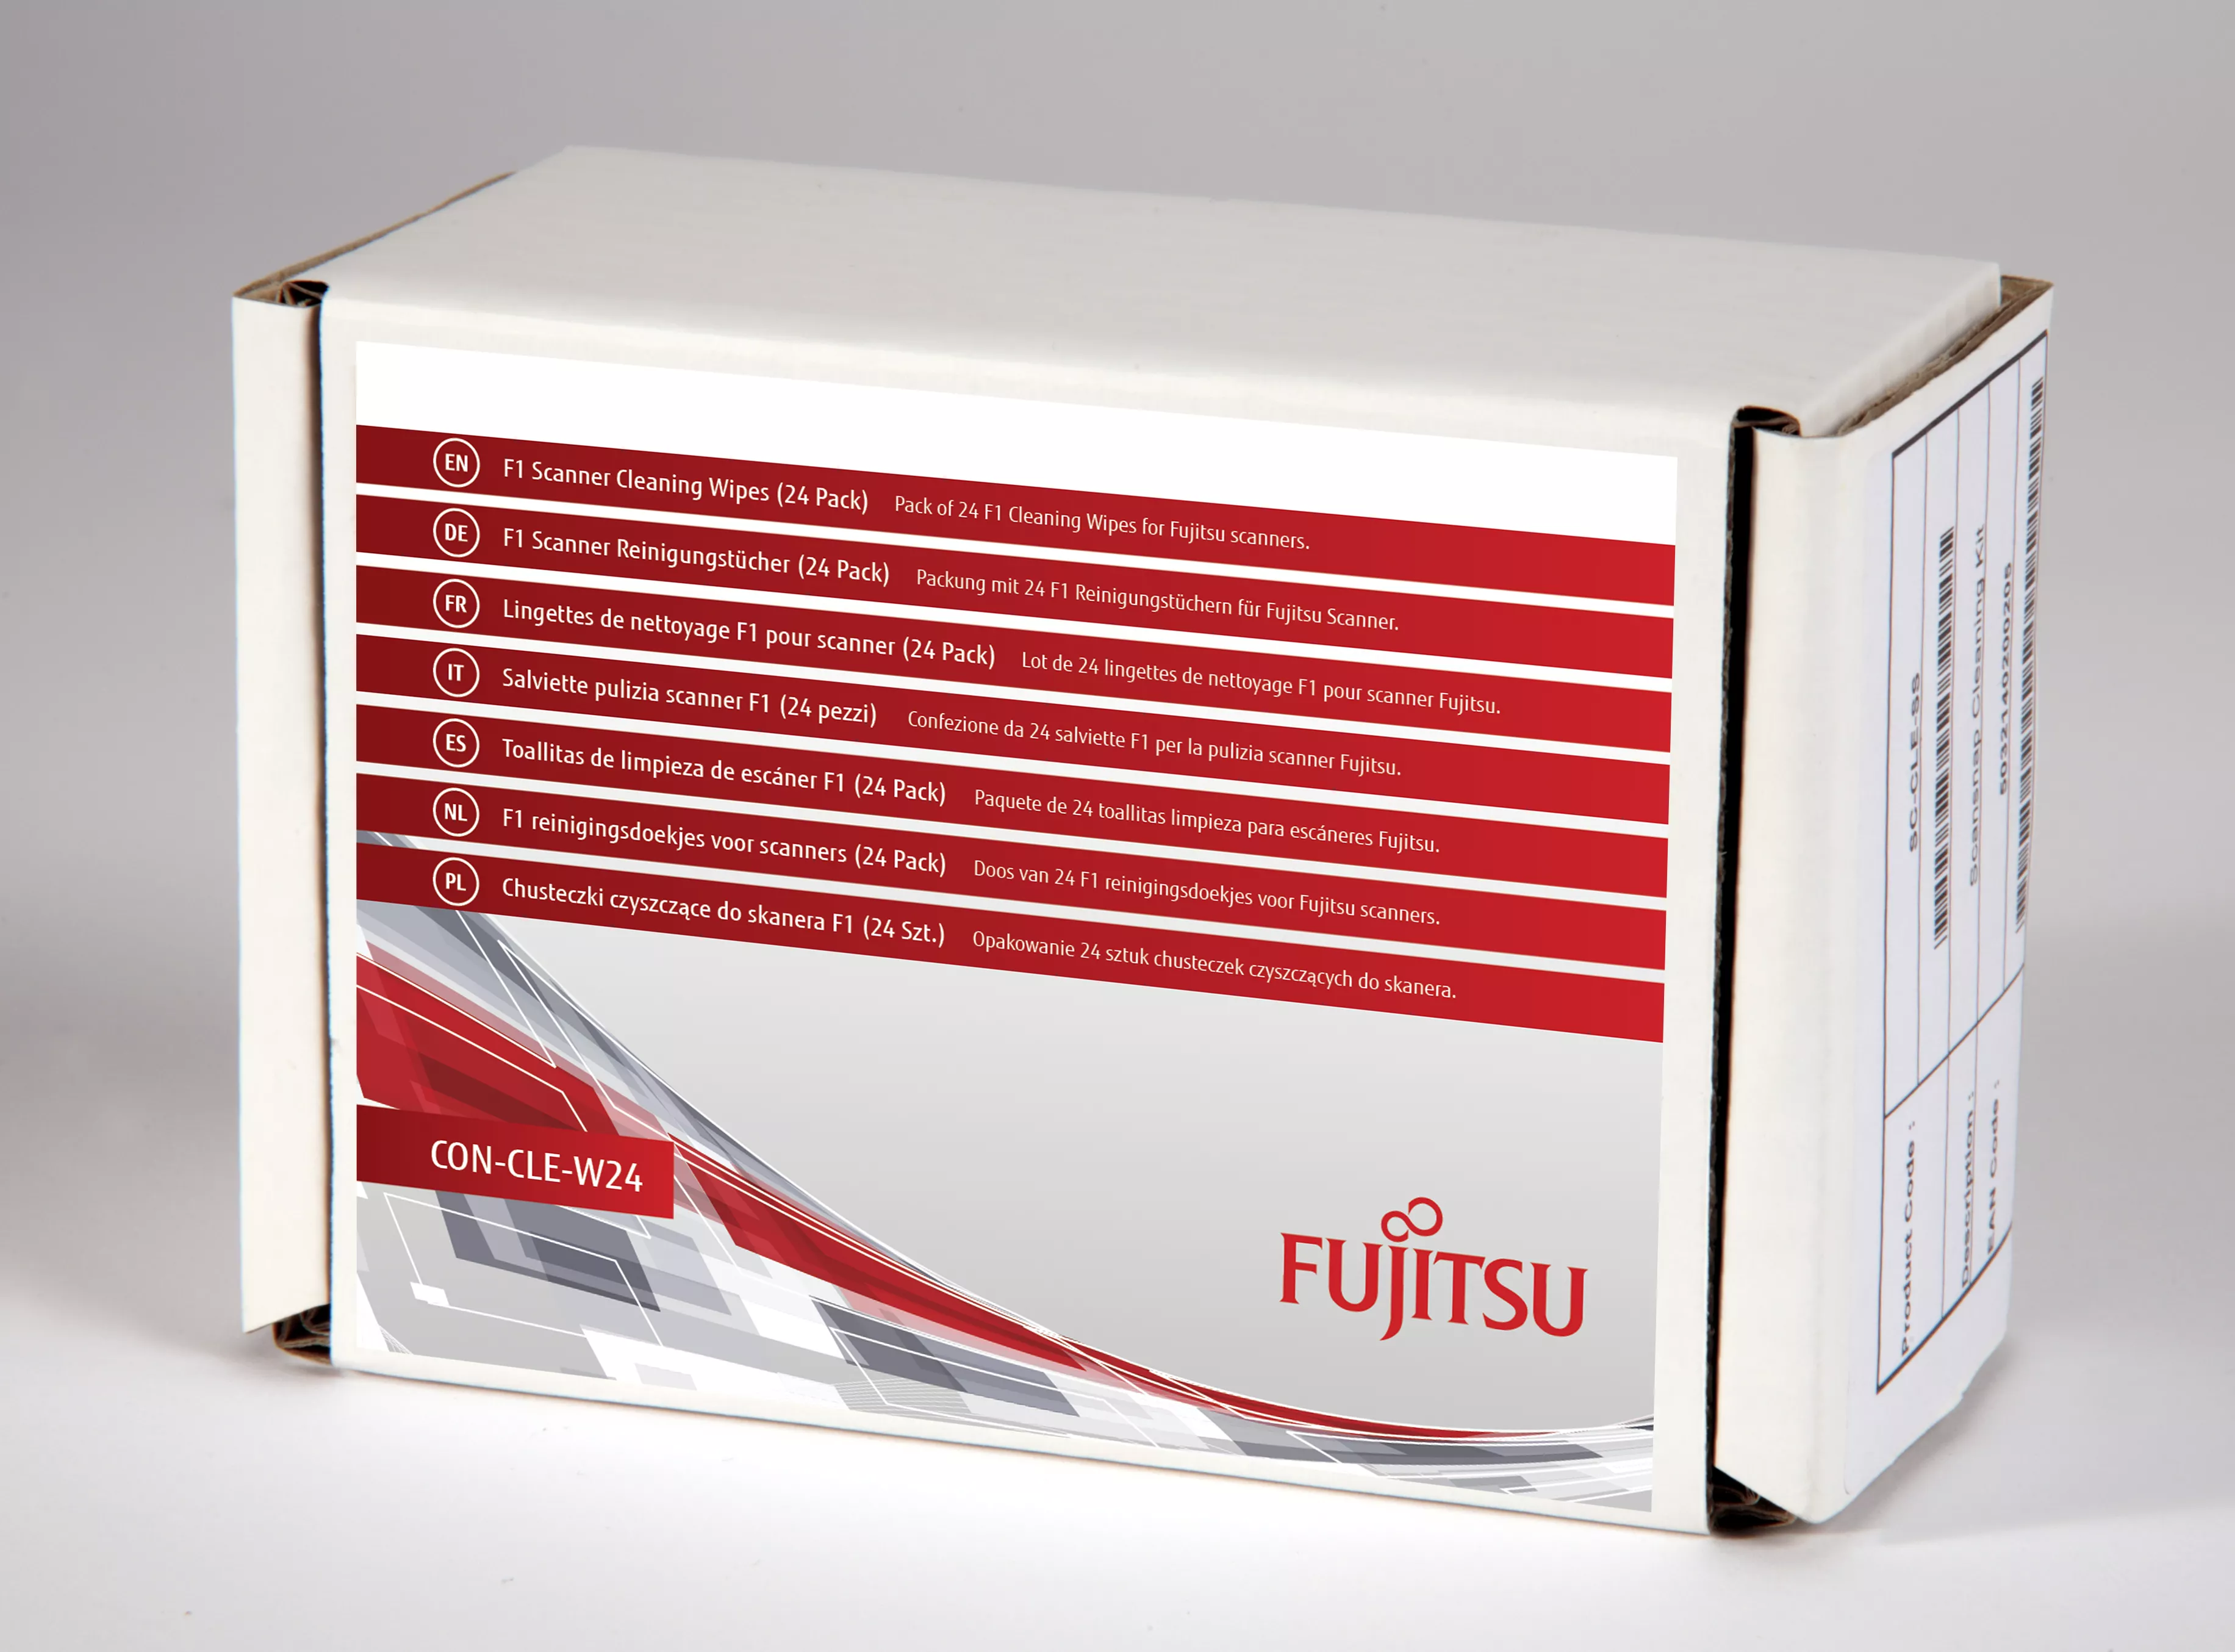 Achat FUJITSU Pack of 24 F1 Cleaning Wipes for Fujitsu scanners sur hello RSE